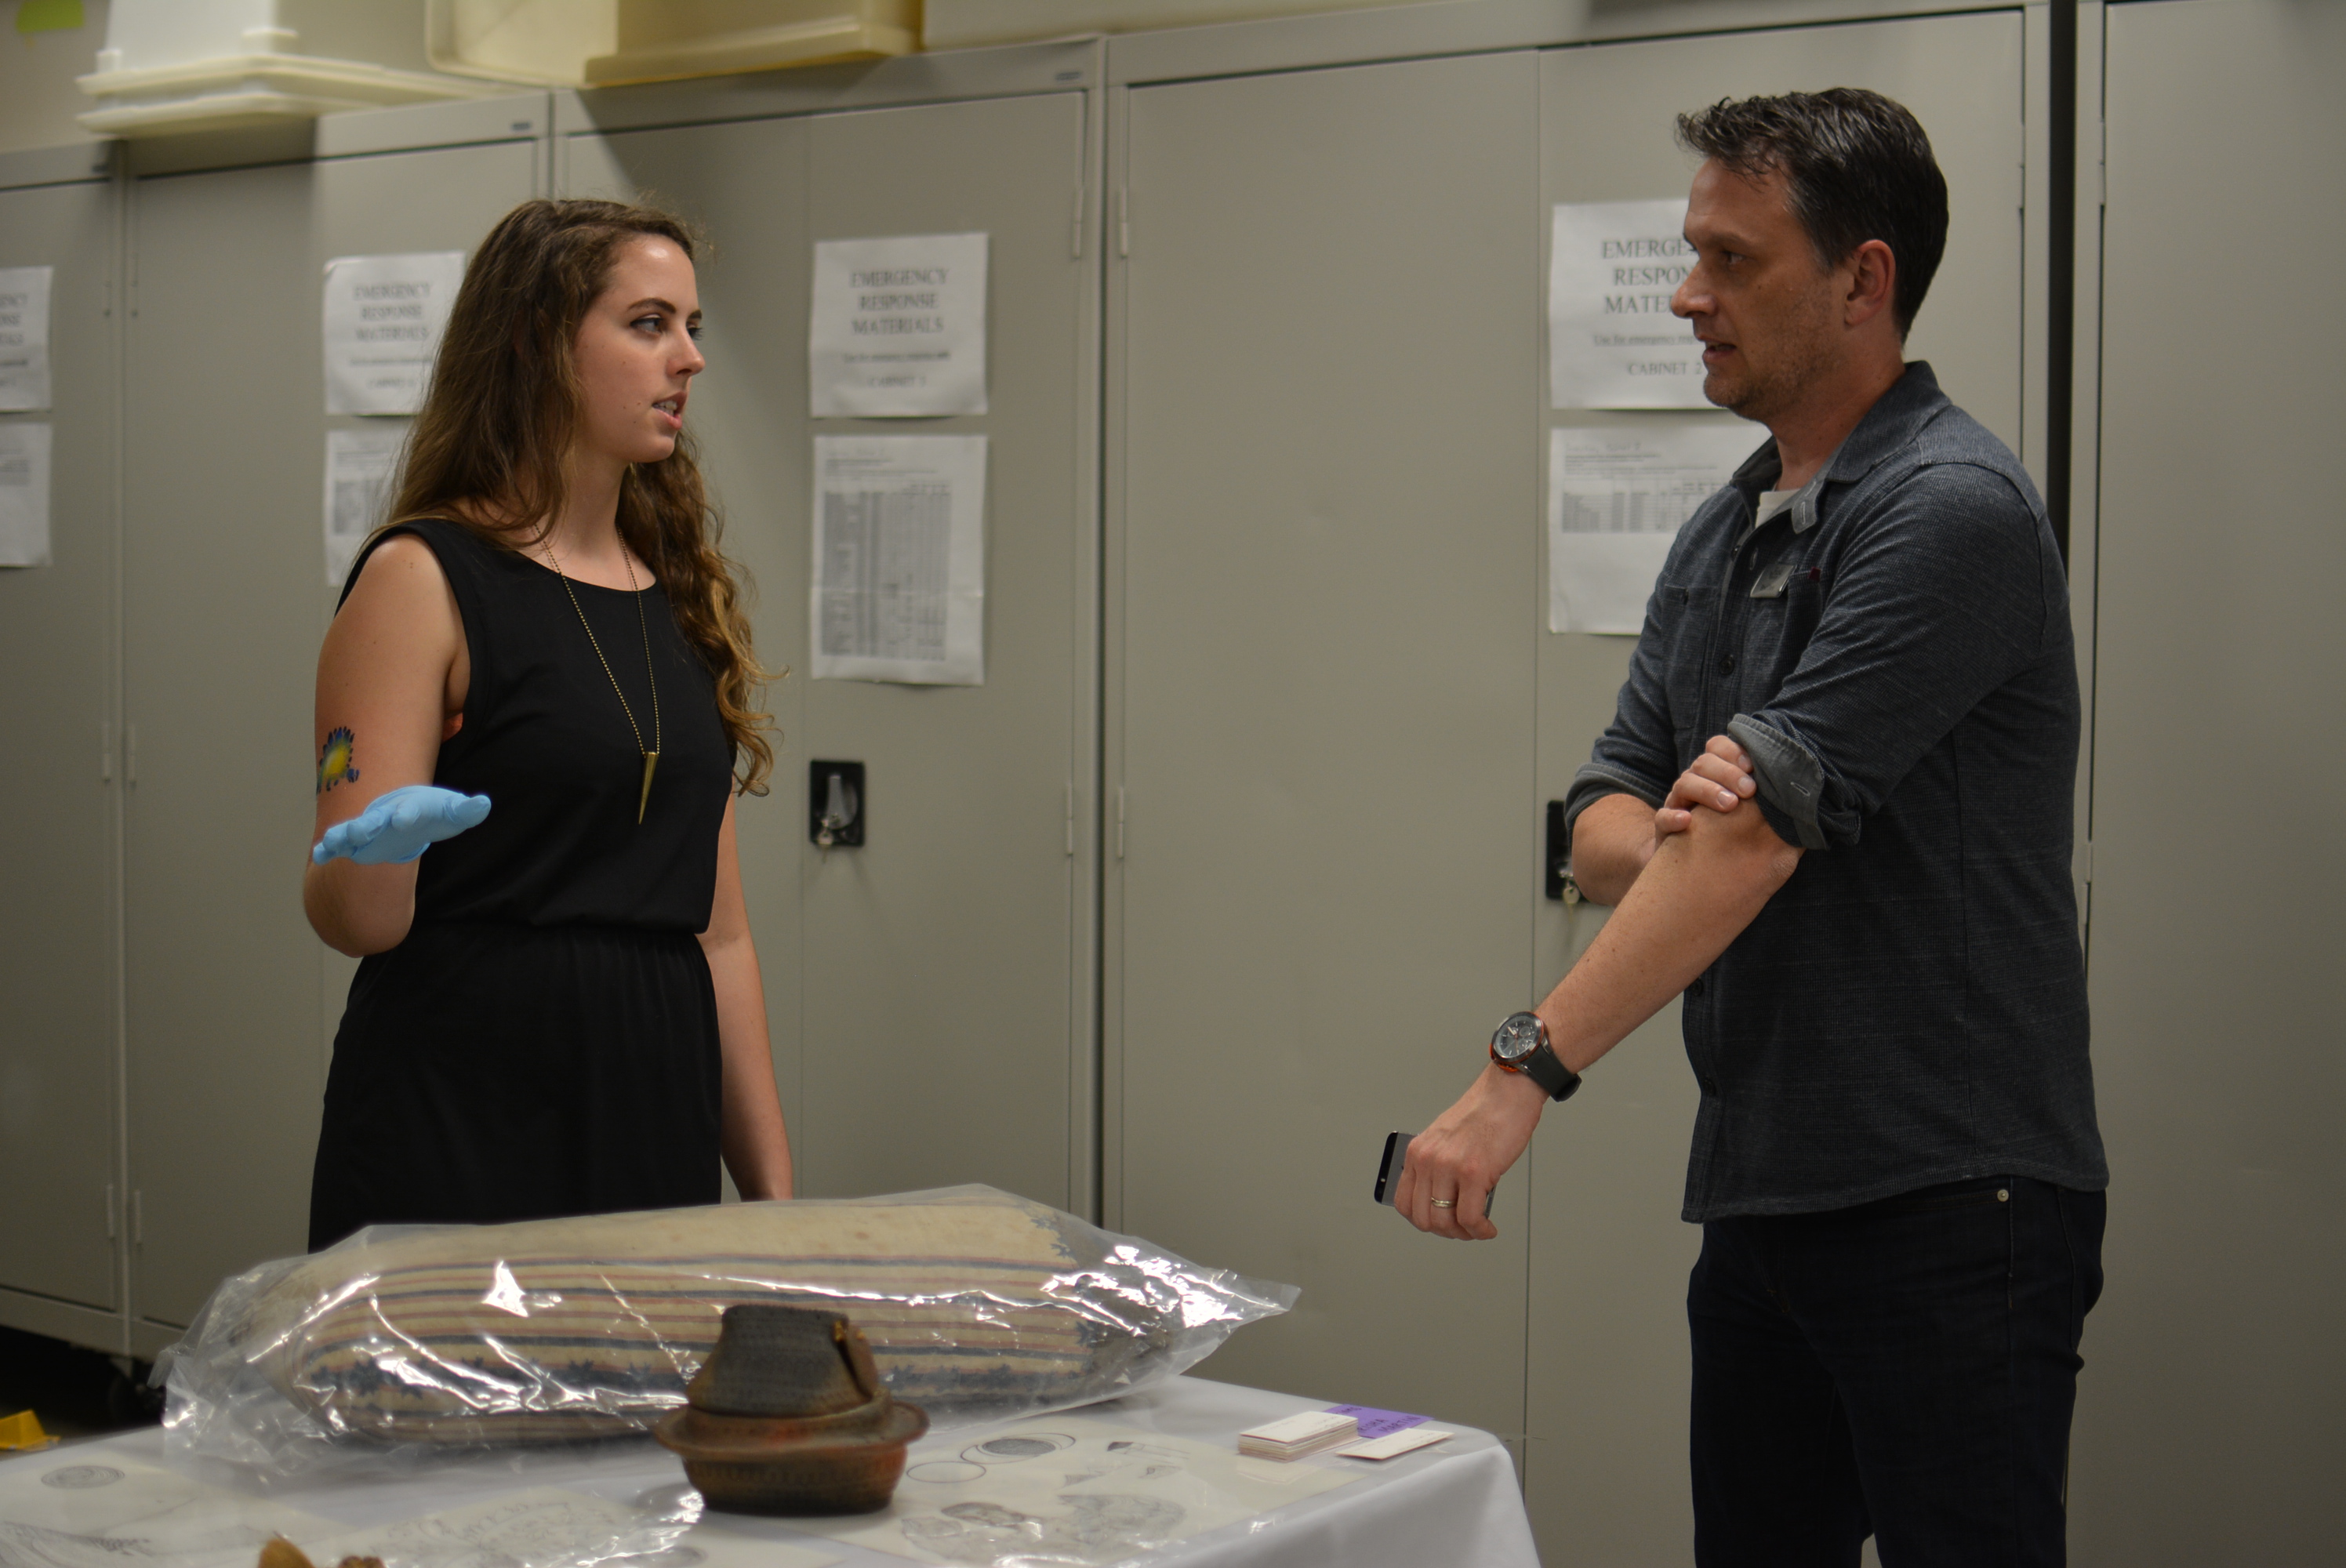 Cassie discussing co-curation with another Field Museum employee, Brad. 